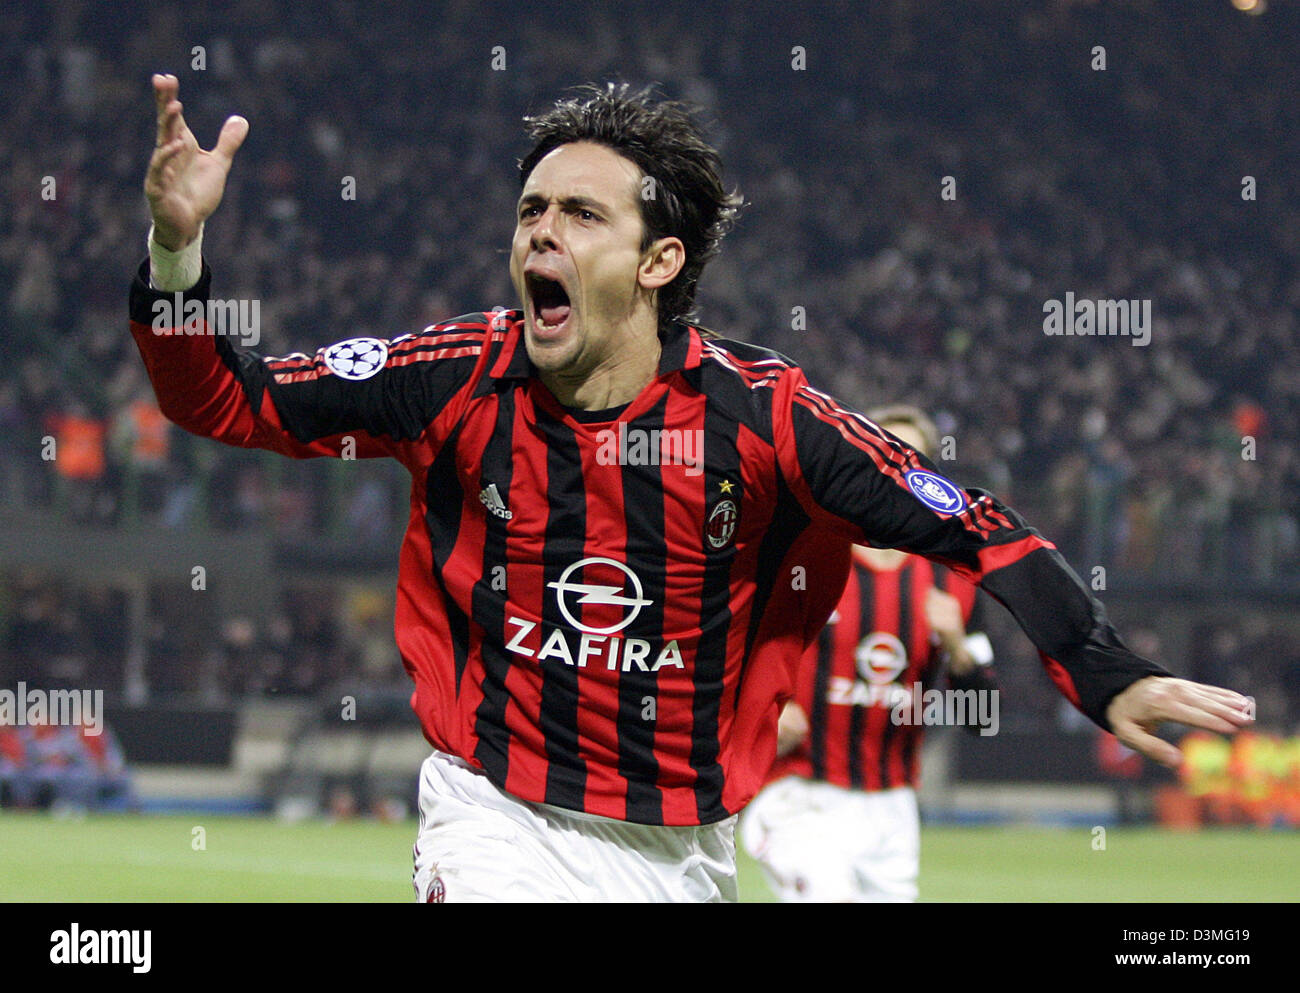 AC Milan's Filippo Inzaghi celebrates his second goal against FC Bayern Munich during the UEFA Champions League round of last 16 clash at the Giuseppe-Meazza stadium in Milan, Italy, Wednesday, 08 March 2006. Deadlocked at 1-1 after the first leg, Inzaghi headed Milan ahead in the San Siro from Serginho's cross. Shevchenko missed a penalty but made up for it two minutes later by he Stock Photo